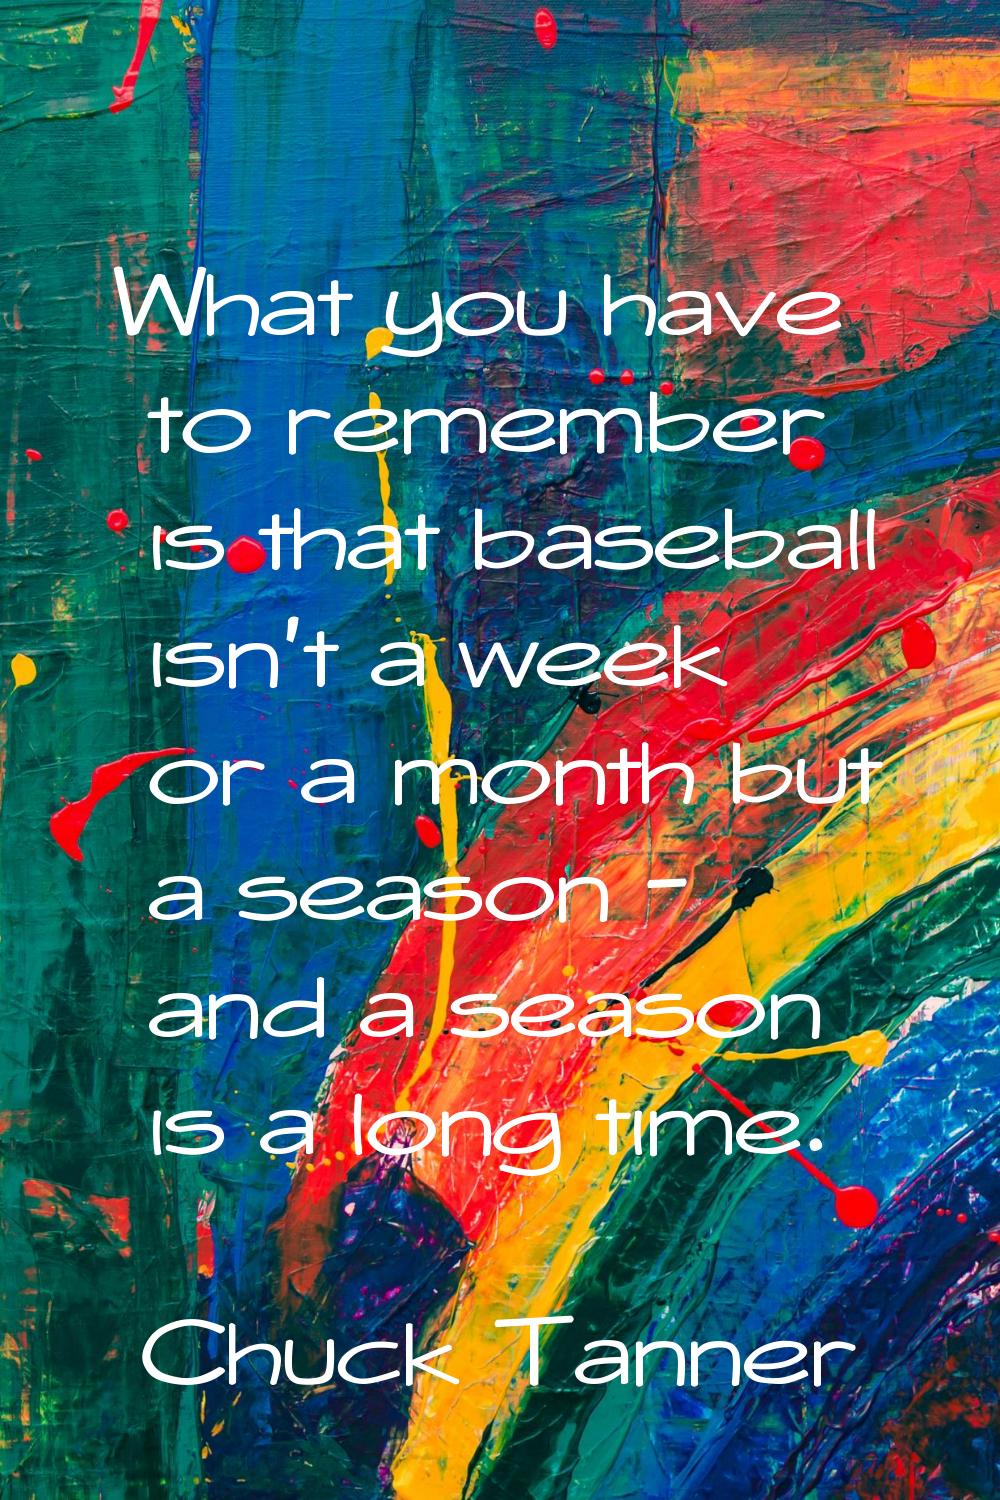 What you have to remember is that baseball isn't a week or a month but a season - and a season is a